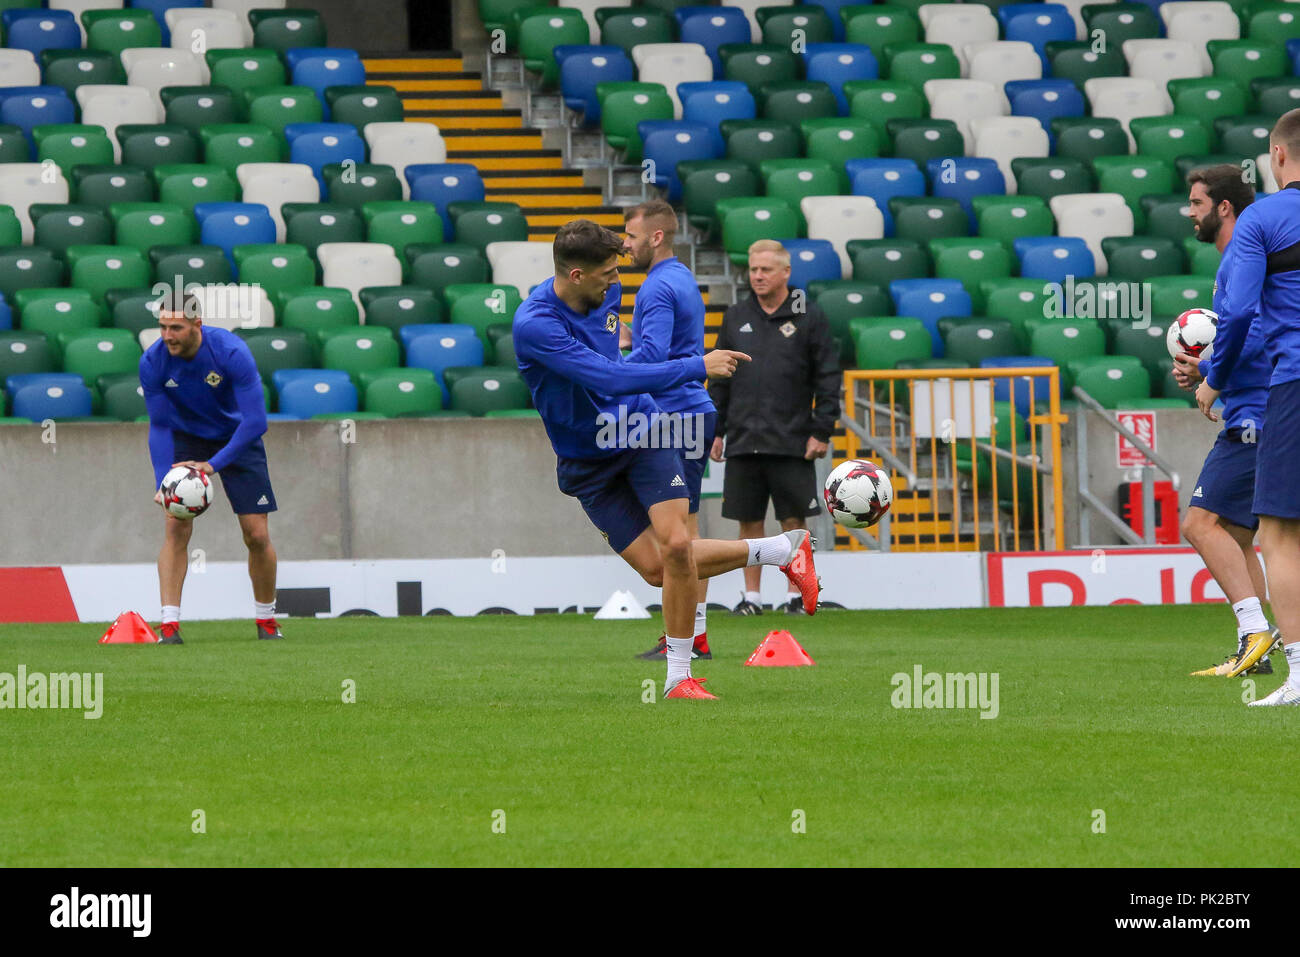 Windsor Park, Belfast, Northern Ireland. 10 September 2018. After Saturday's defeat in the UEFA Nations League, Northern Ireland returned to training this morning at Windsor Park. Tomorrow night they play Israel in a friendly international. Craig Cathcart (centre) in training. Credit: David Hunter/Alamy Live News. Stock Photo